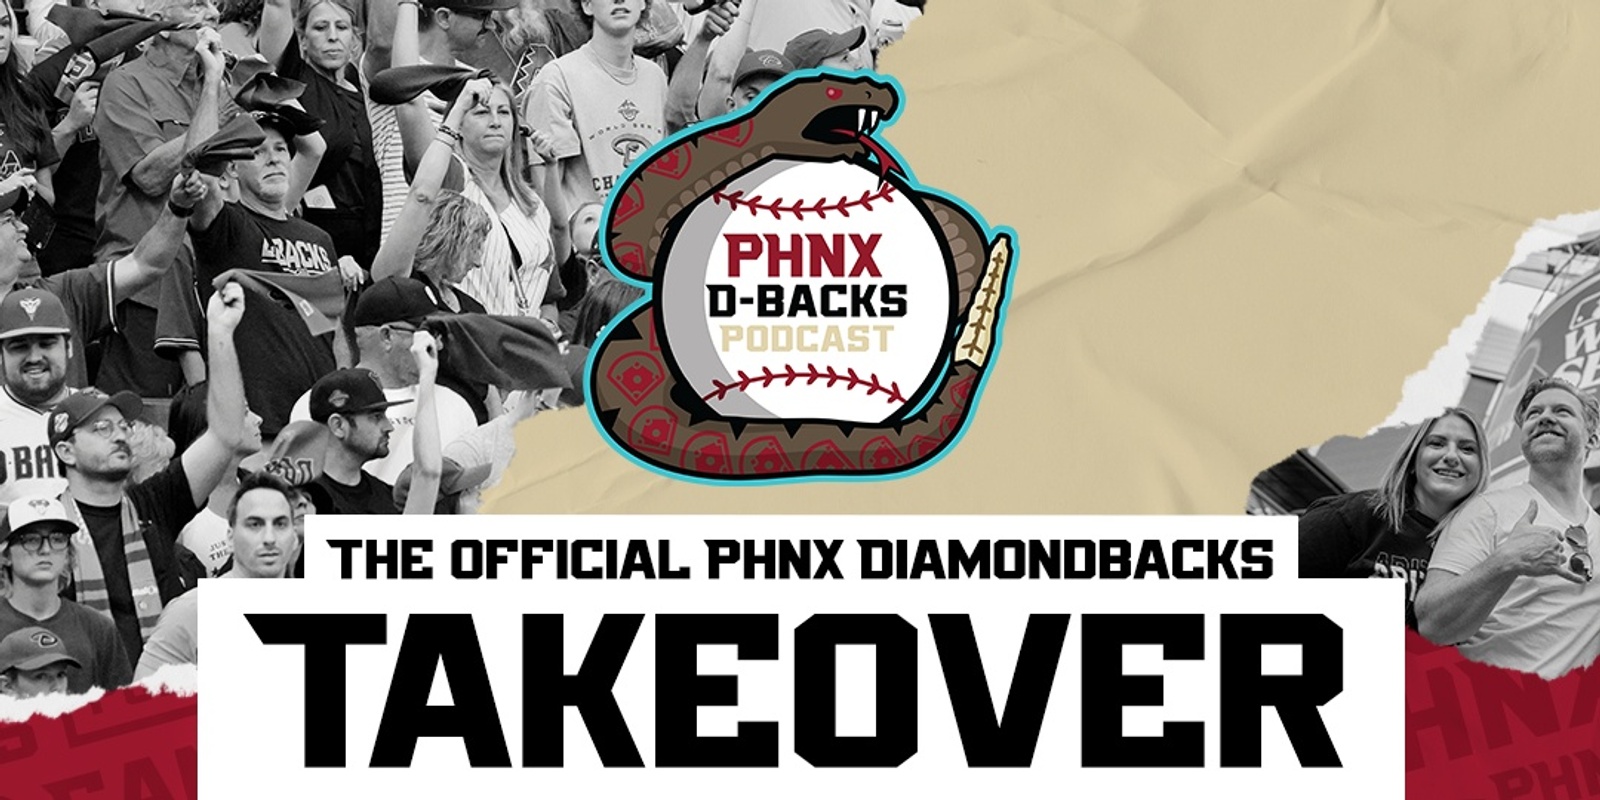 Banner image for PHNX Diamondbacks Takeover at Chase Field